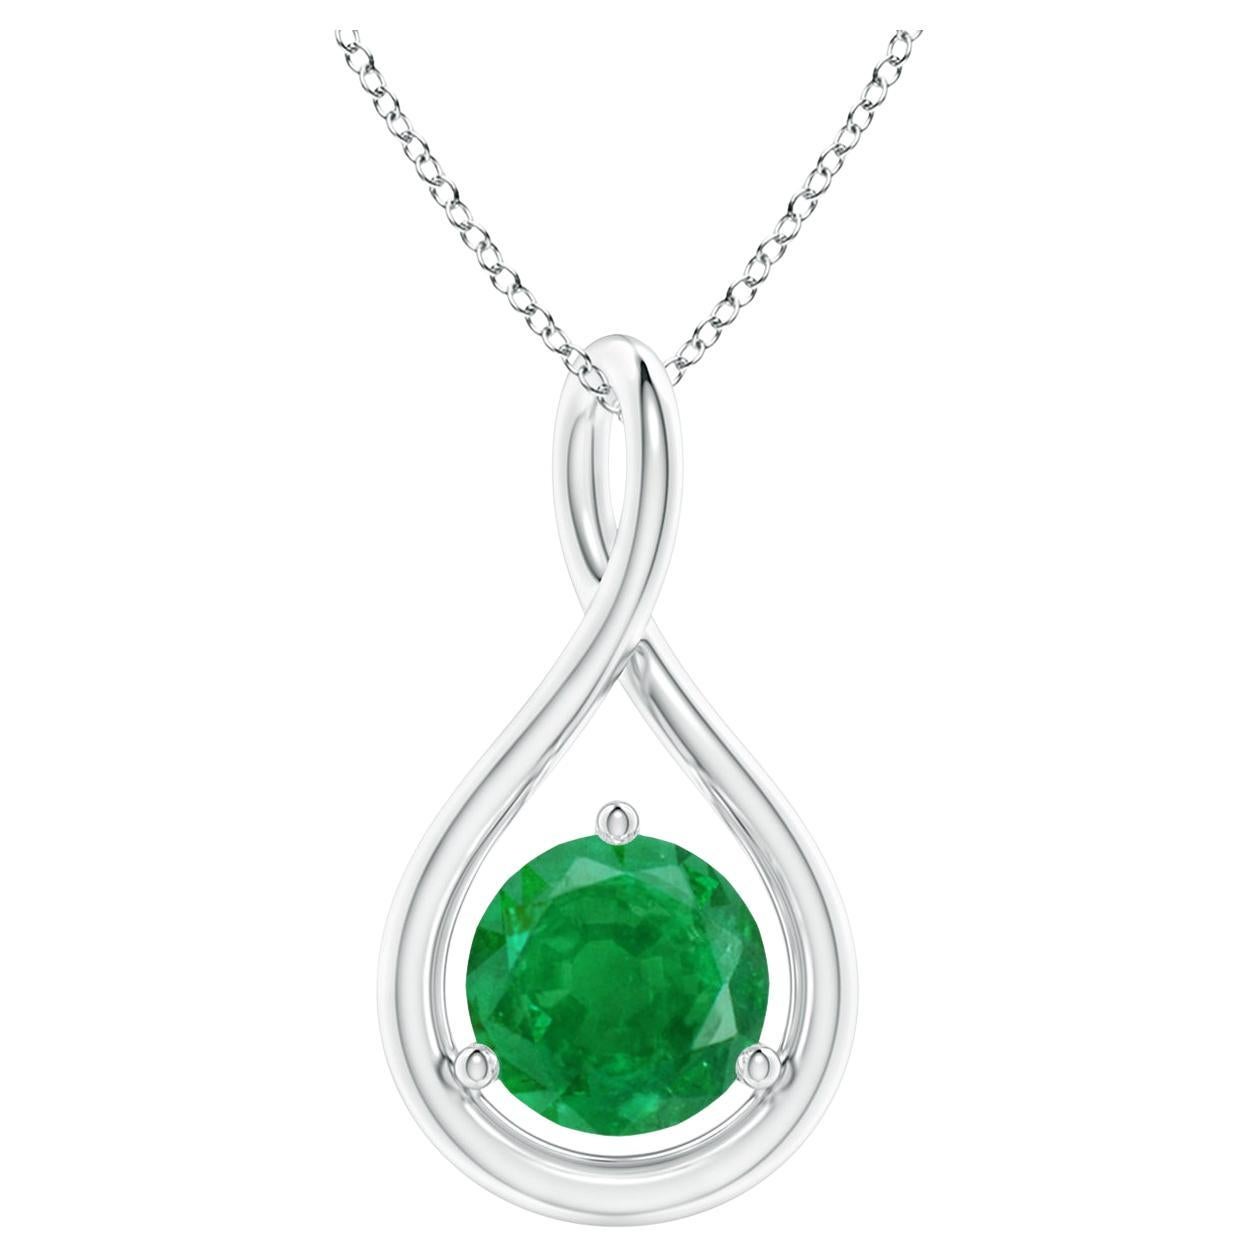 Natural Solitaire Round Emerald Infinity Pendant in 14K White Gold 6mm